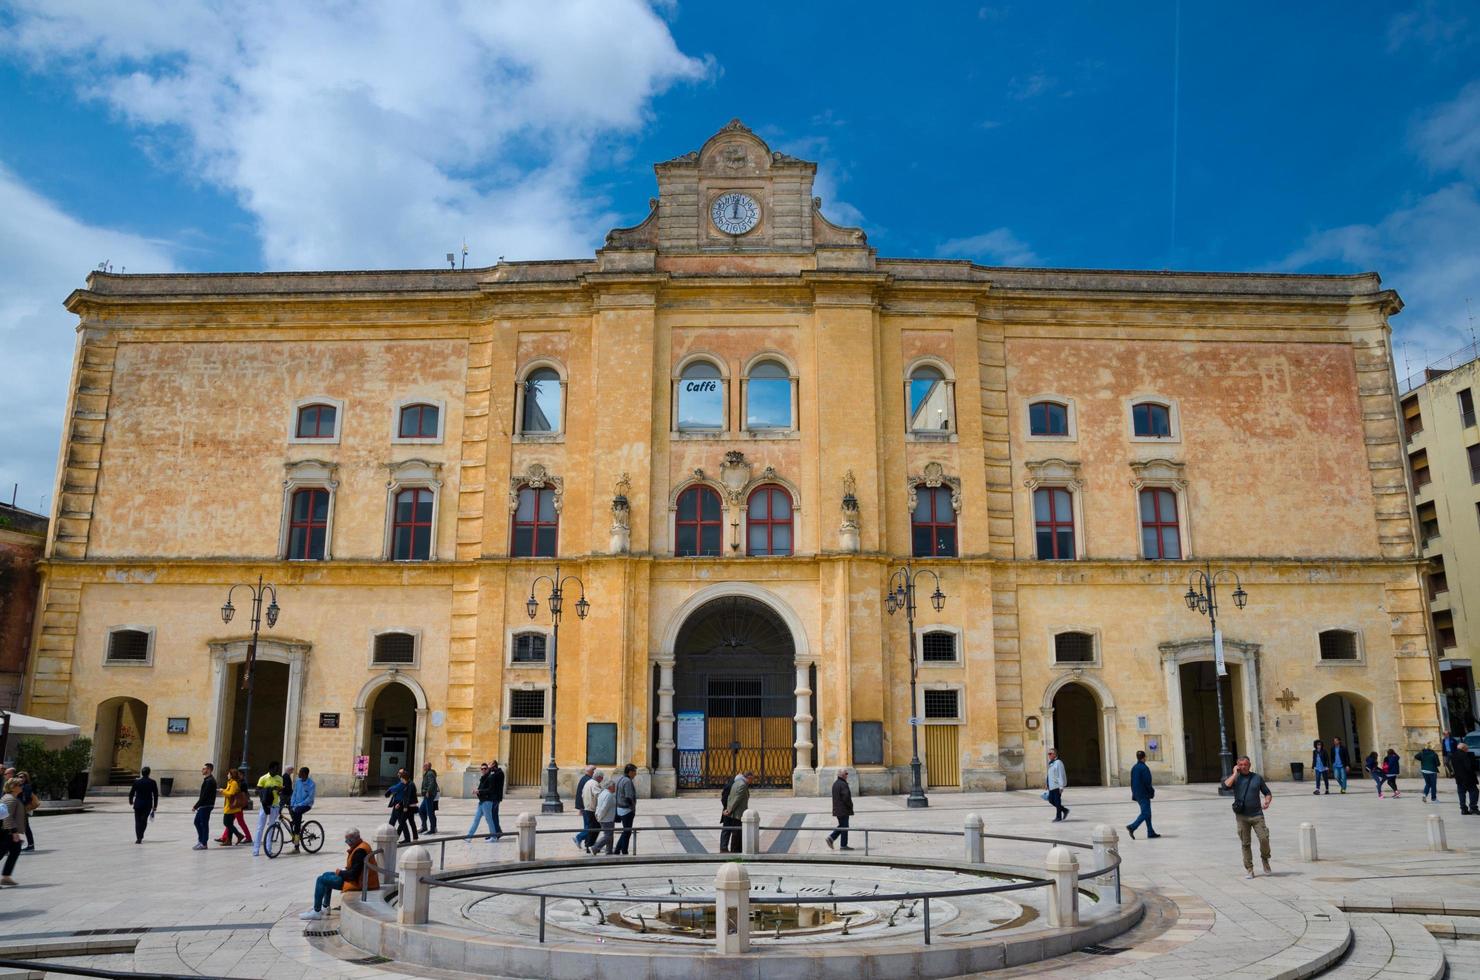 Matera, Italy - May 6, 2018 People walking near Cinema Comunale Palazzo dell'Annunziata palace with clock on facade and fountain on Piazza Vittorio Veneto square blue sky background photo